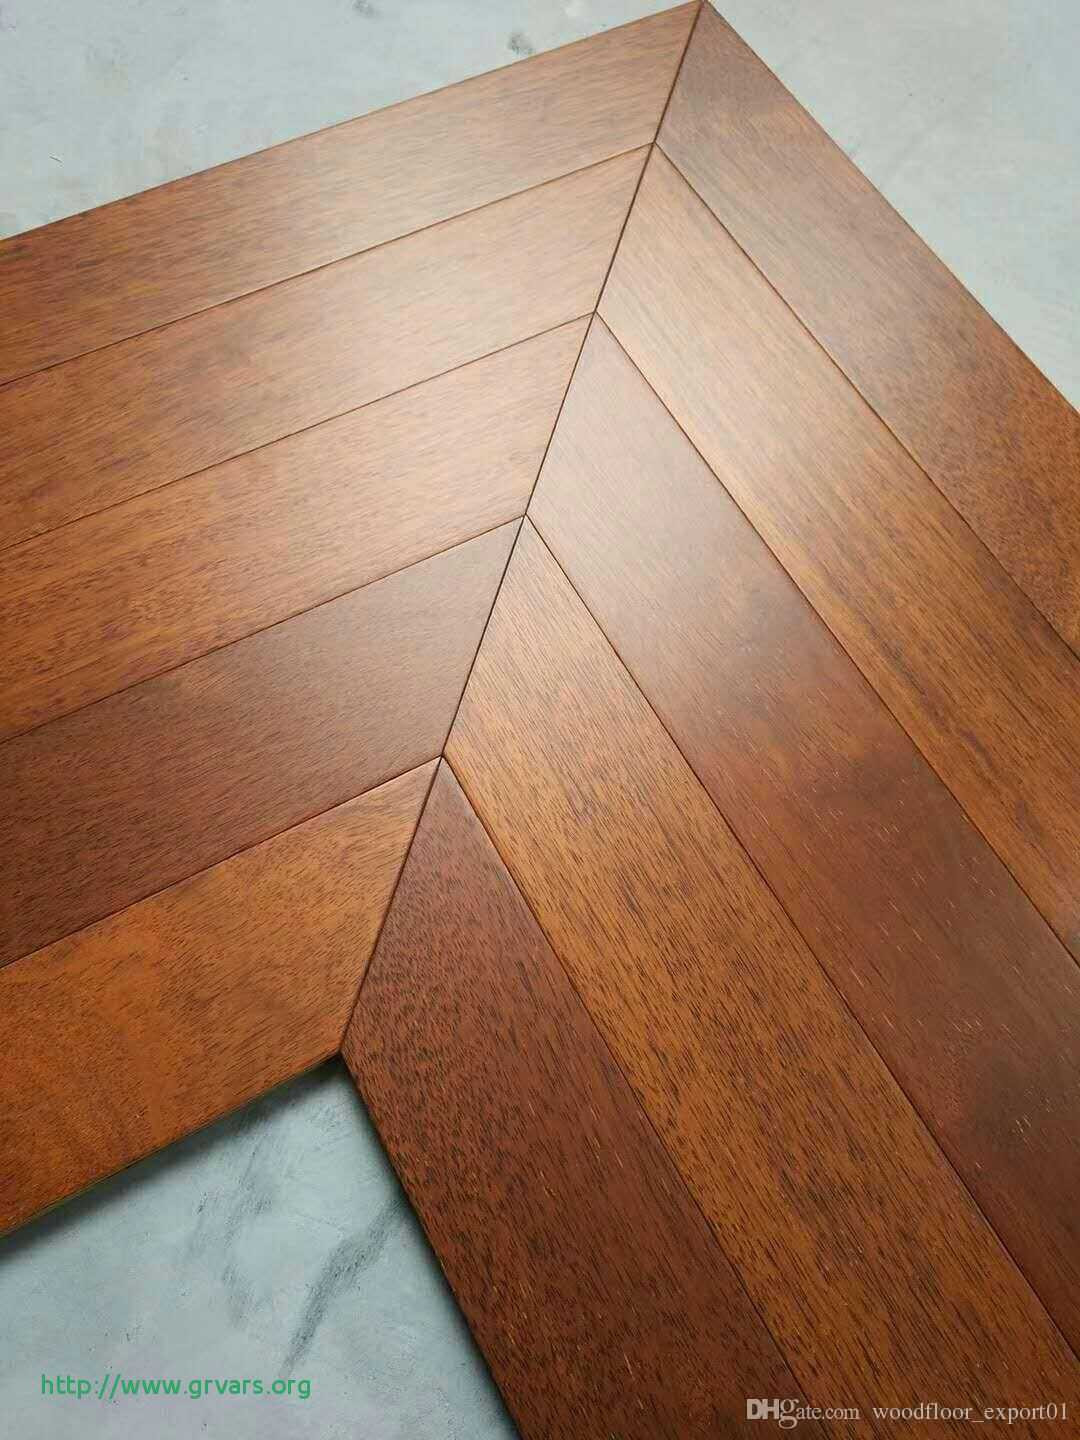 10 Fashionable Hardwood Floors Next to Tile 2023 free download hardwood floors next to tile of elite flooring and design meilleur de where to buy hardwood flooring pertaining to elite flooring and design meilleur de where to buy hardwood flooring inspir